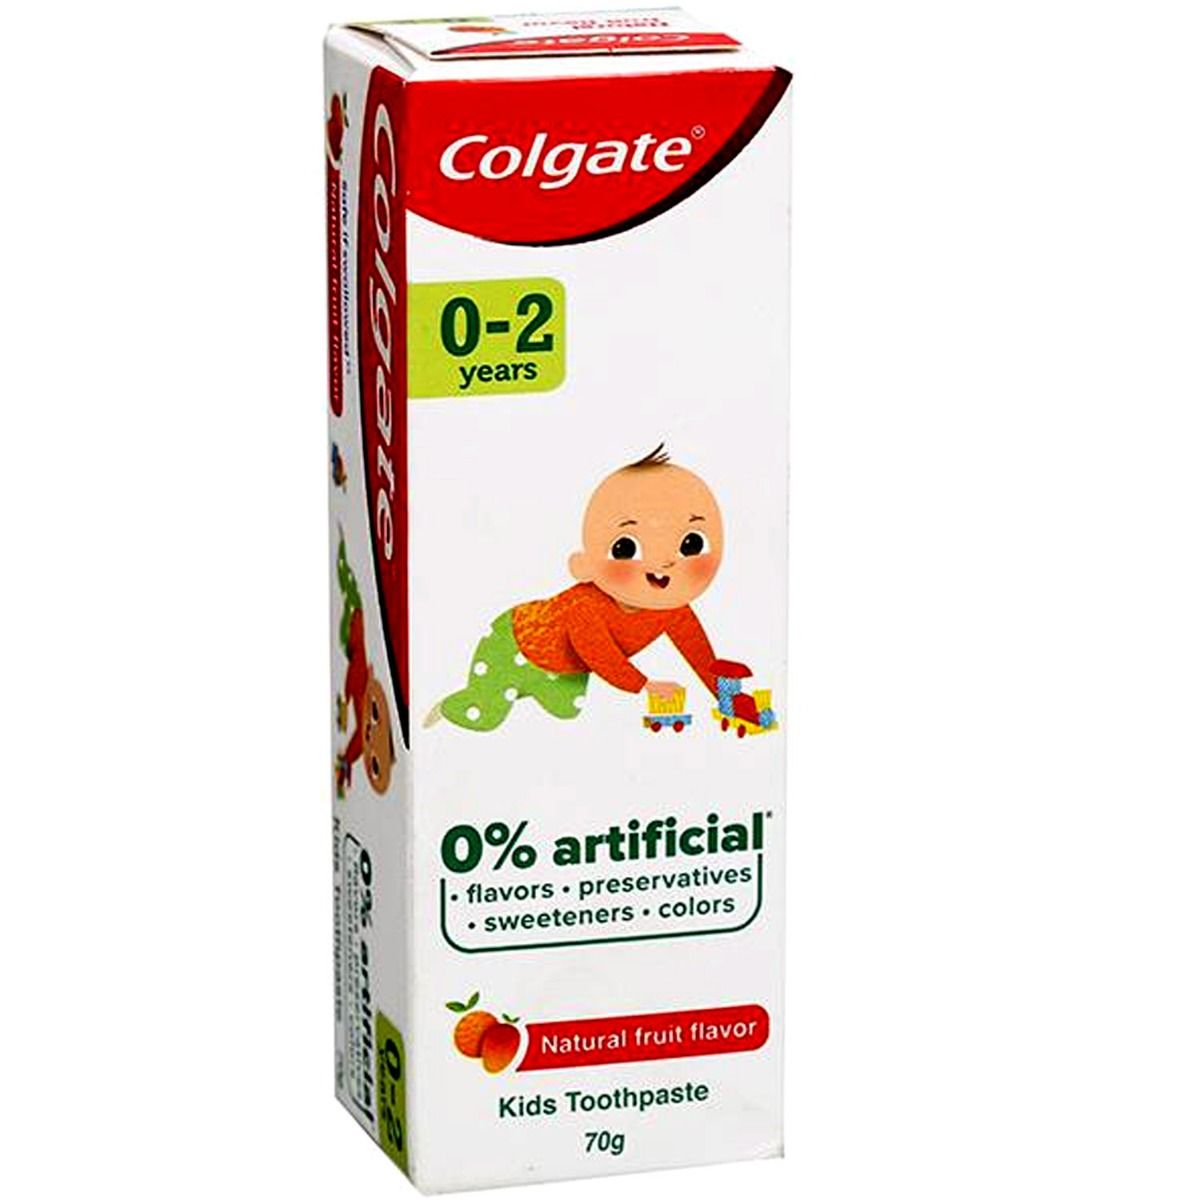 Colgate Toothpaste for Kids (0-2 years), Natural Fruit Flavour, Fluoride Free 70 gm, Pack of 1 